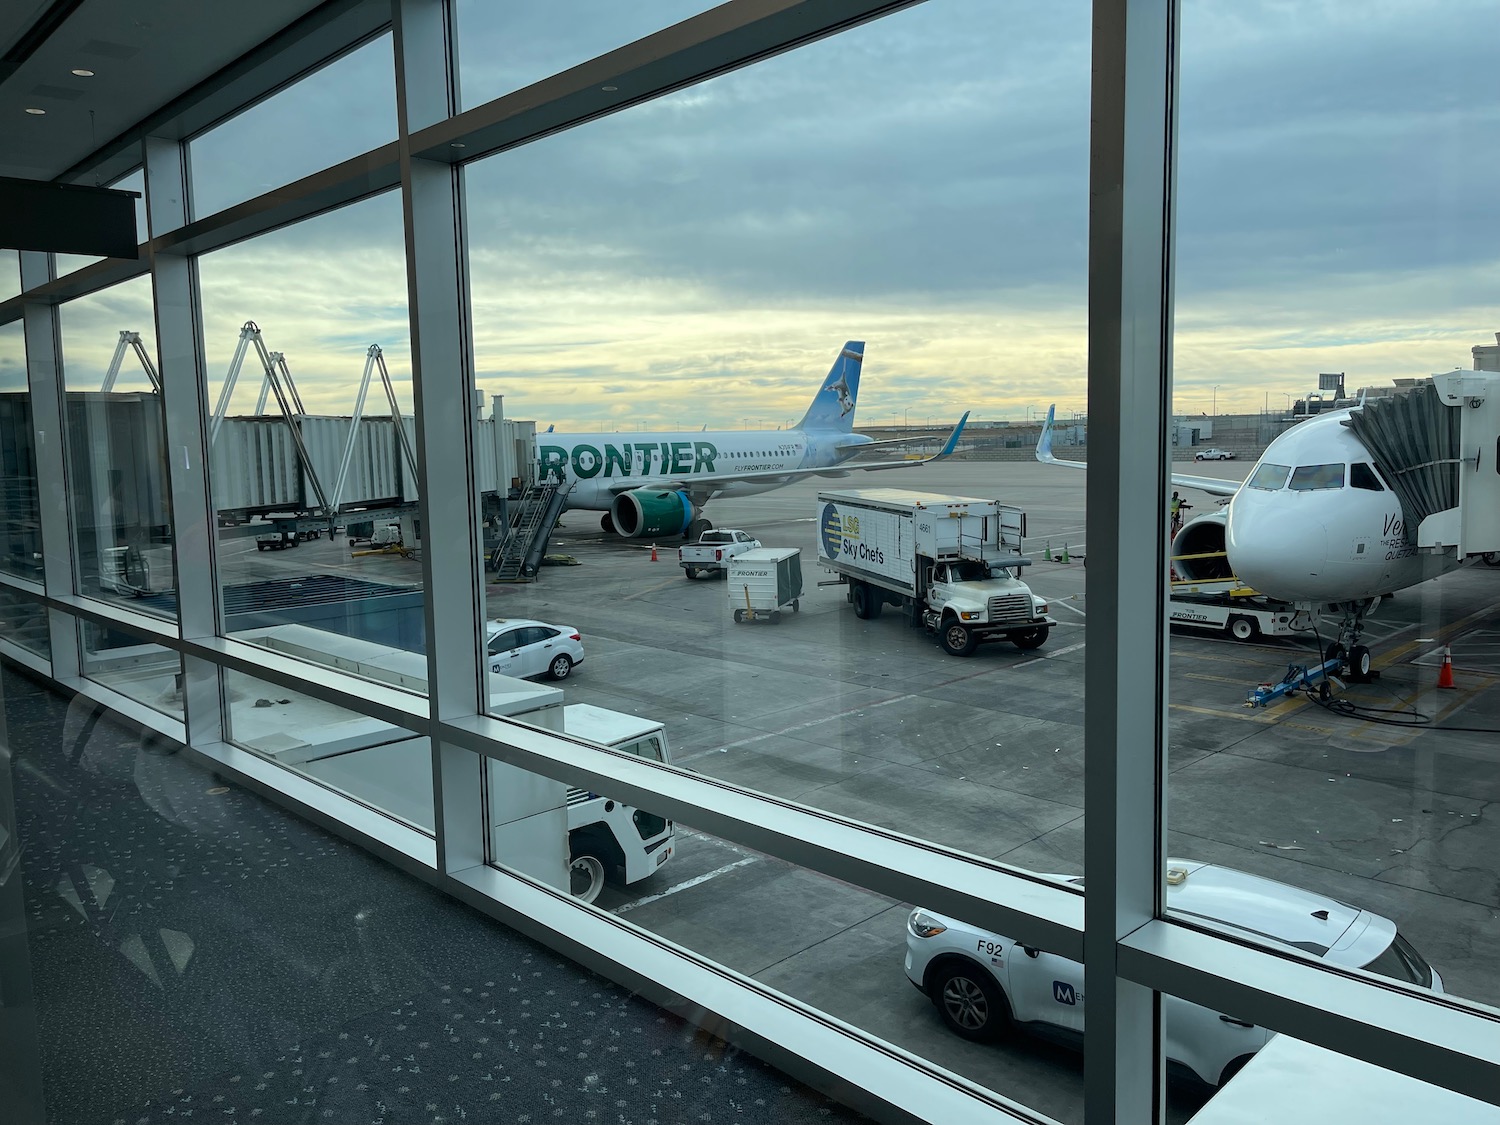 a window view of an airport with airplanes and trucks